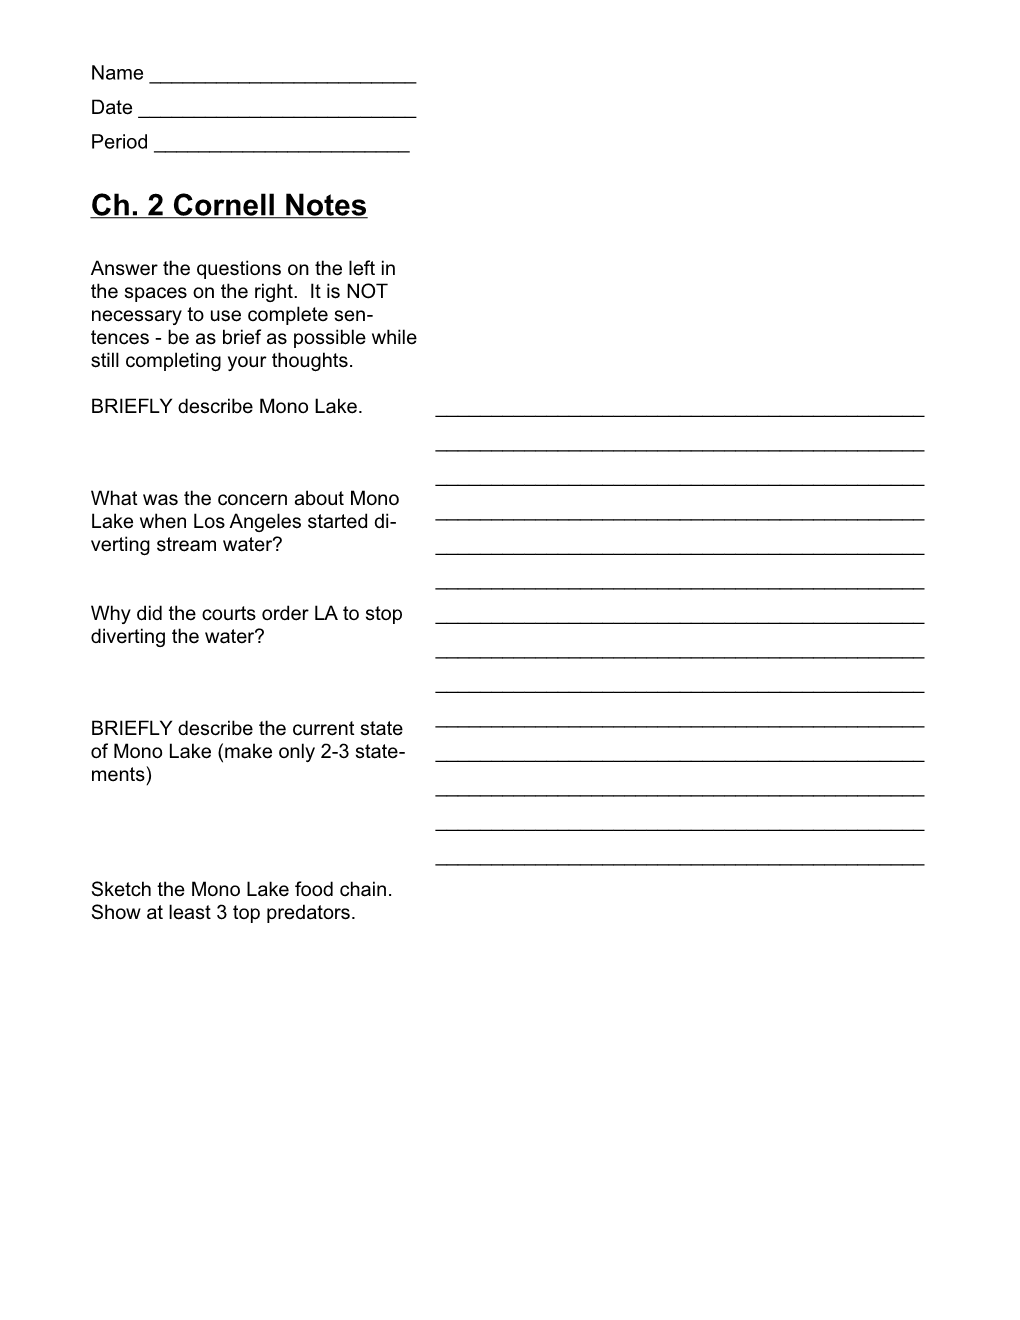 Ch. 2 Cornell Notes